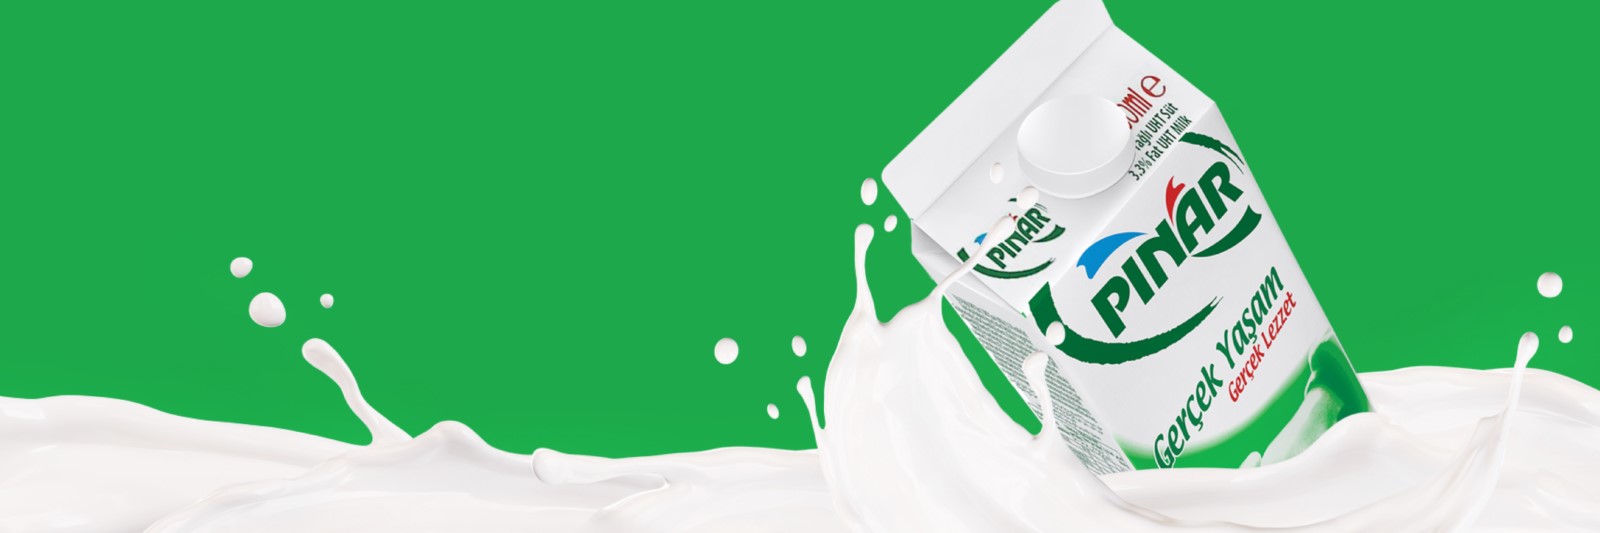 PINAR - 100% FRESH & HEALTHY<br/>DAIRY PRODUCTS